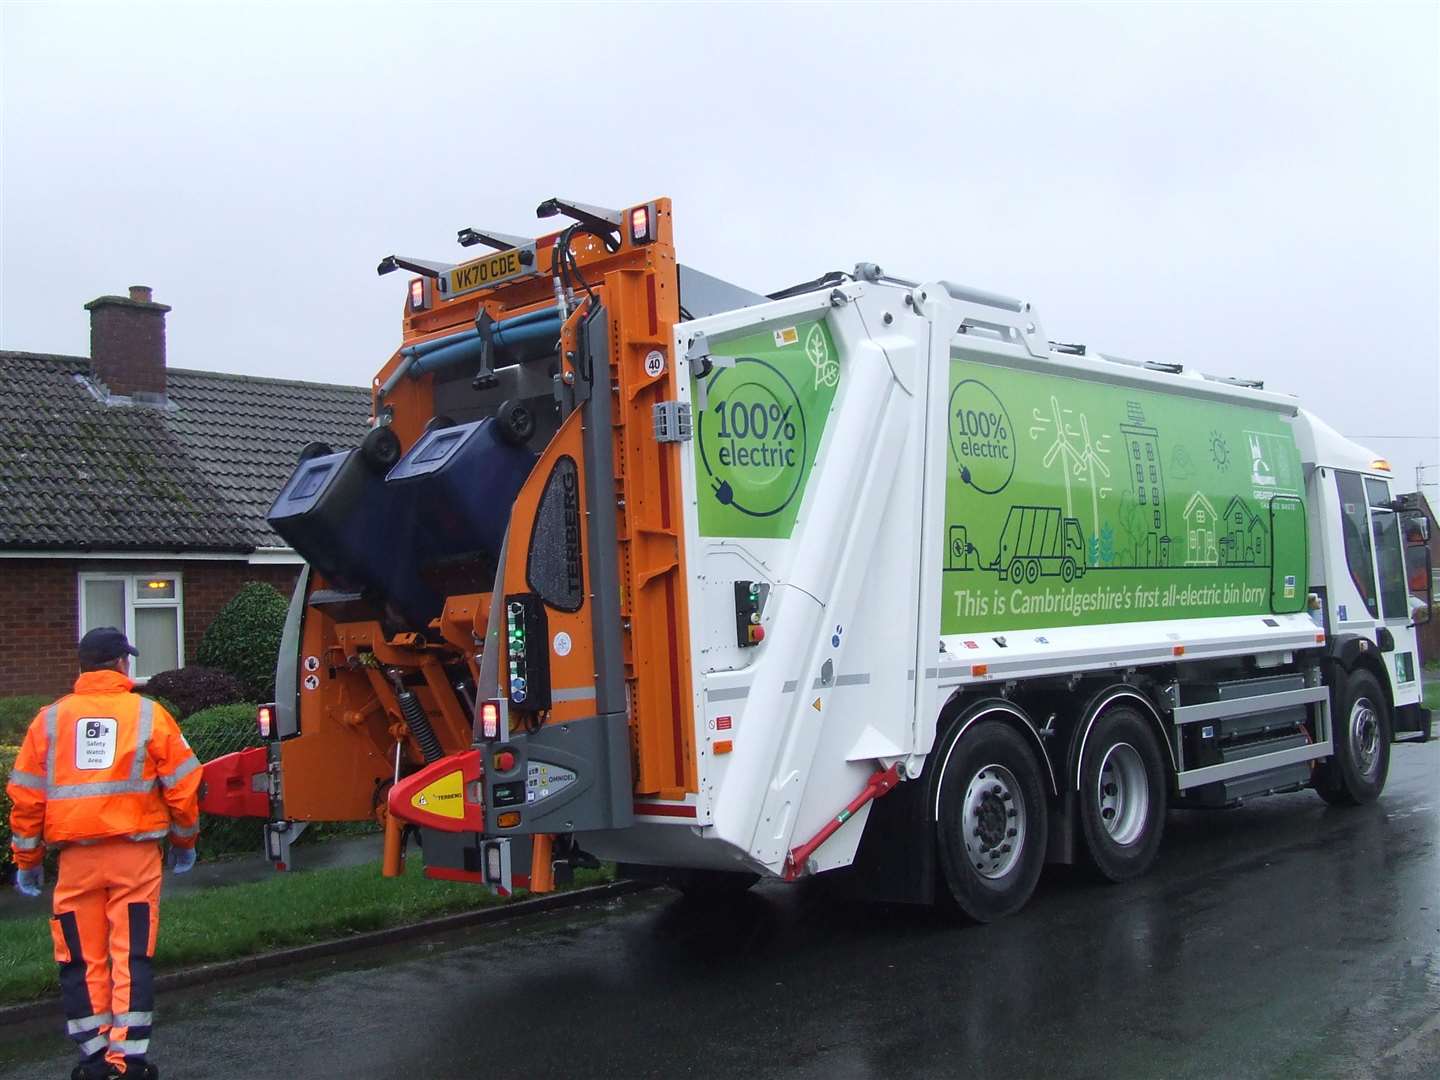 New electric bin vehicles could come to Swale